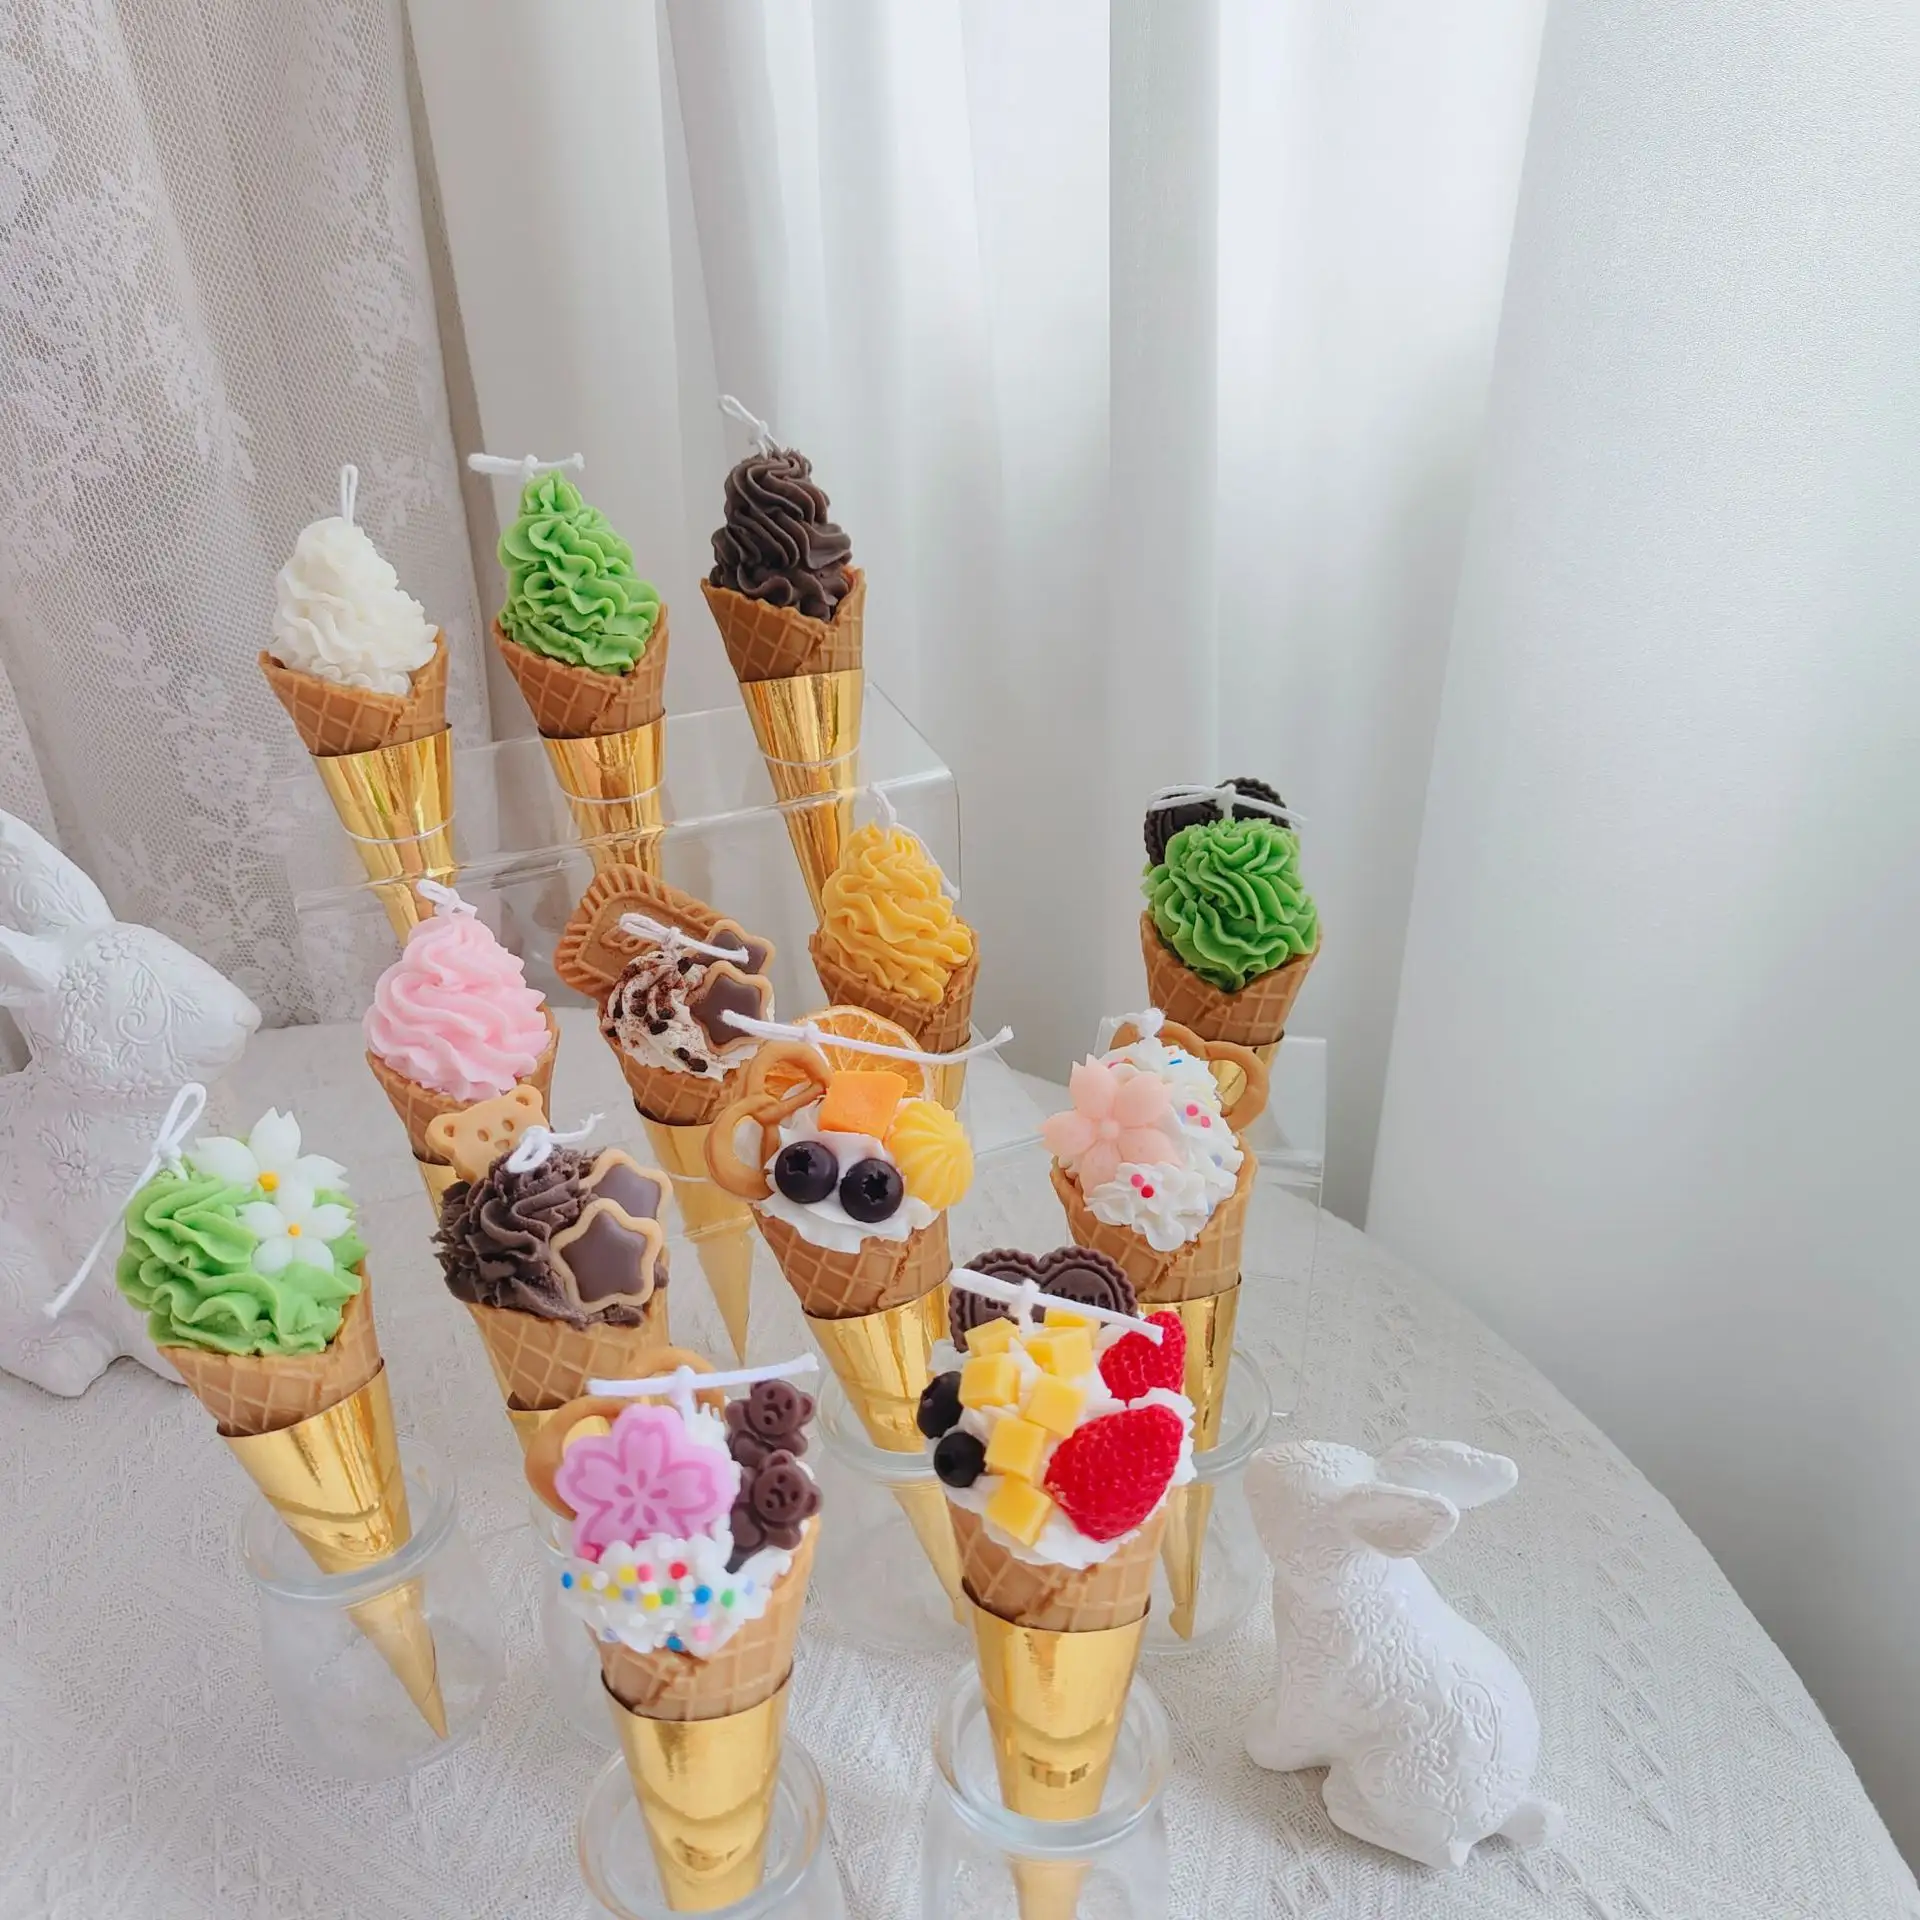 Ice cream cone scented candles soy wax fragrance birthday gift simulation dessert creative handmade decorations